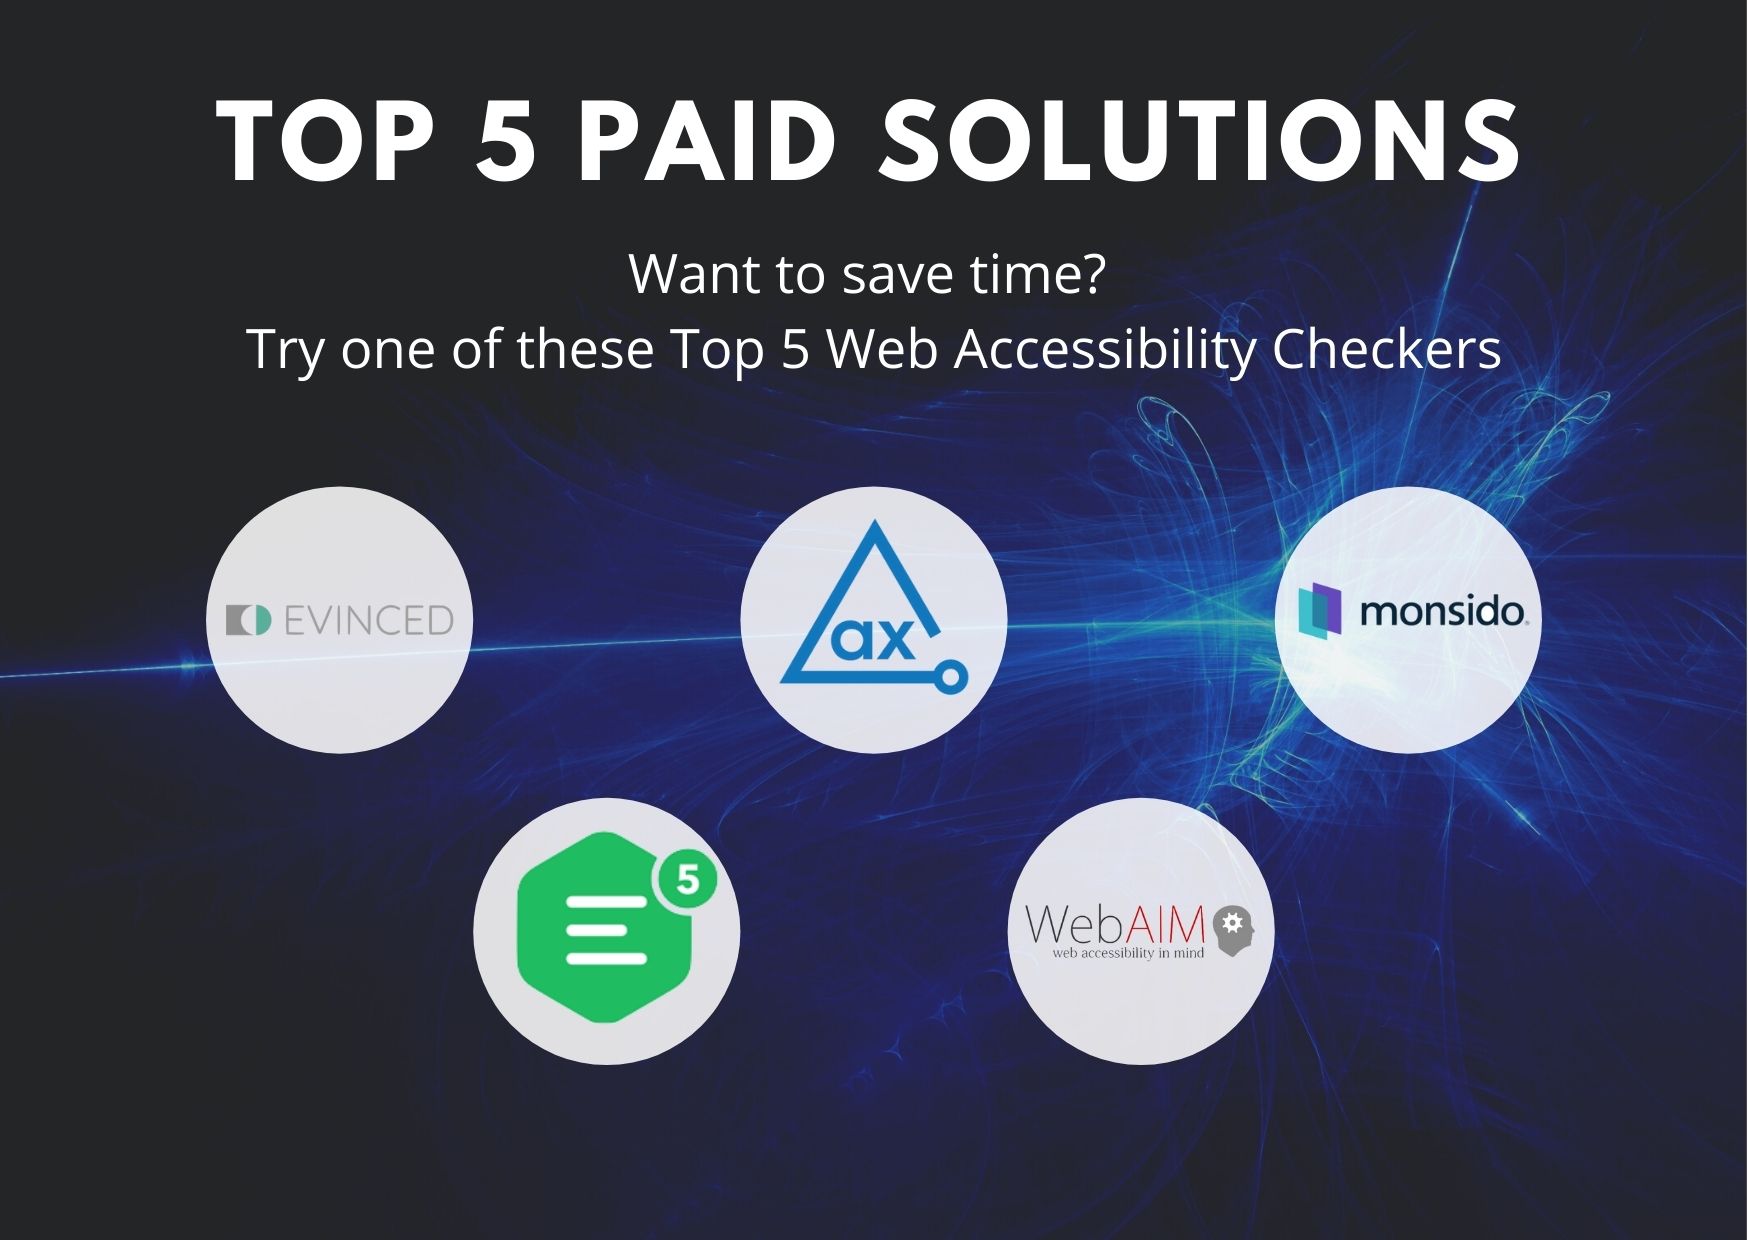 Top 5 Paid Web Accessibility Checkers